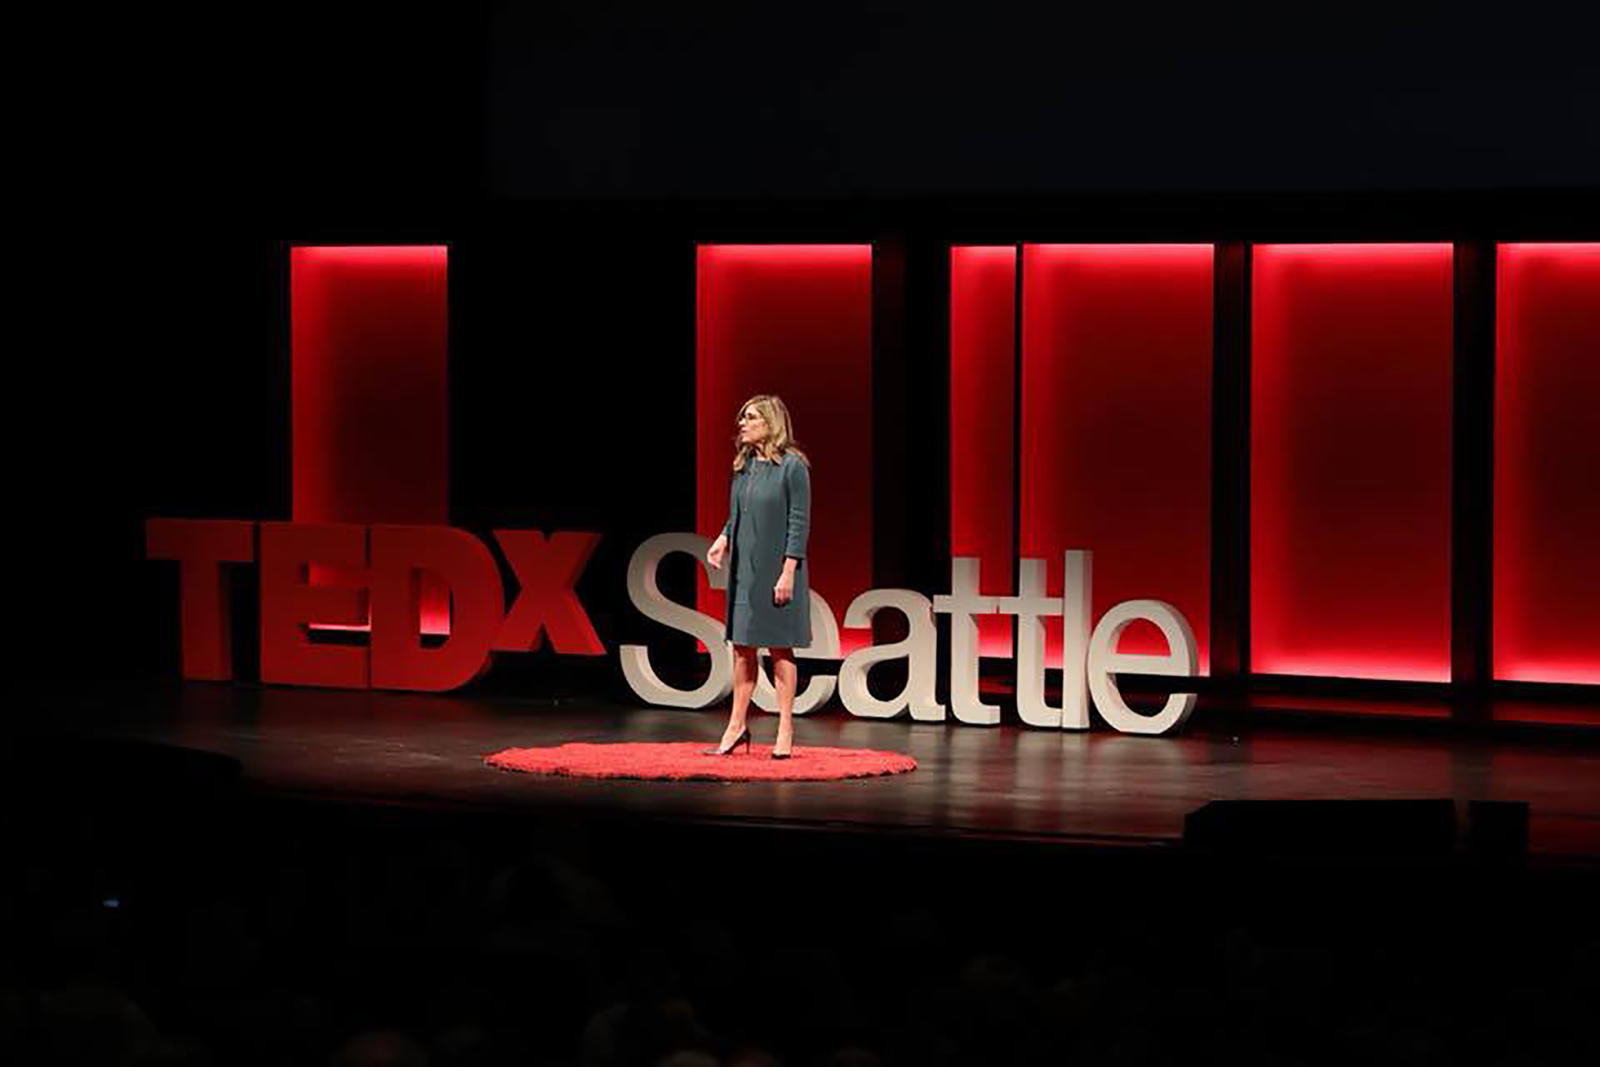 Patty giving an anti-trafficking talk on StolenYouth as part of TEDxSeattle.